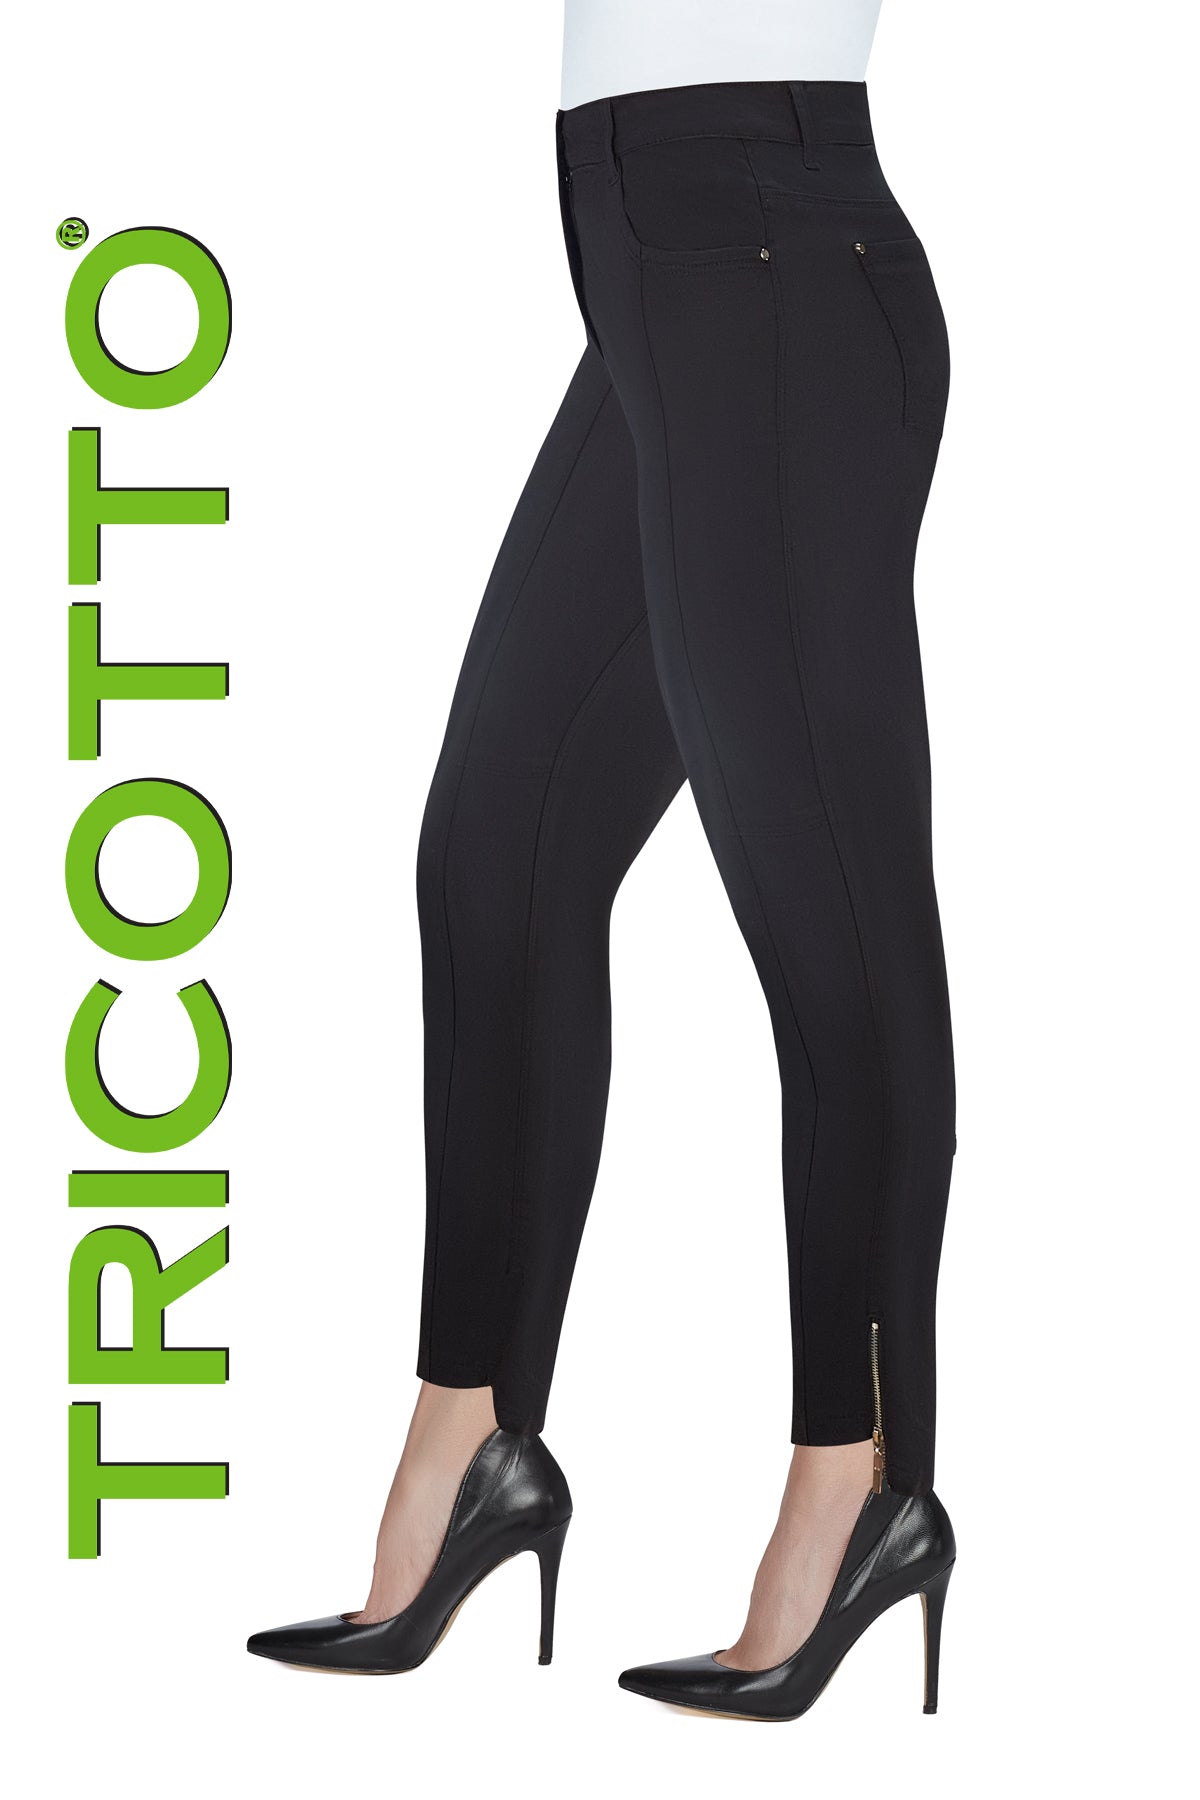 Tricotto Black 5 Pocket Fly Front Pant With Belt Loops And Belt Loops 